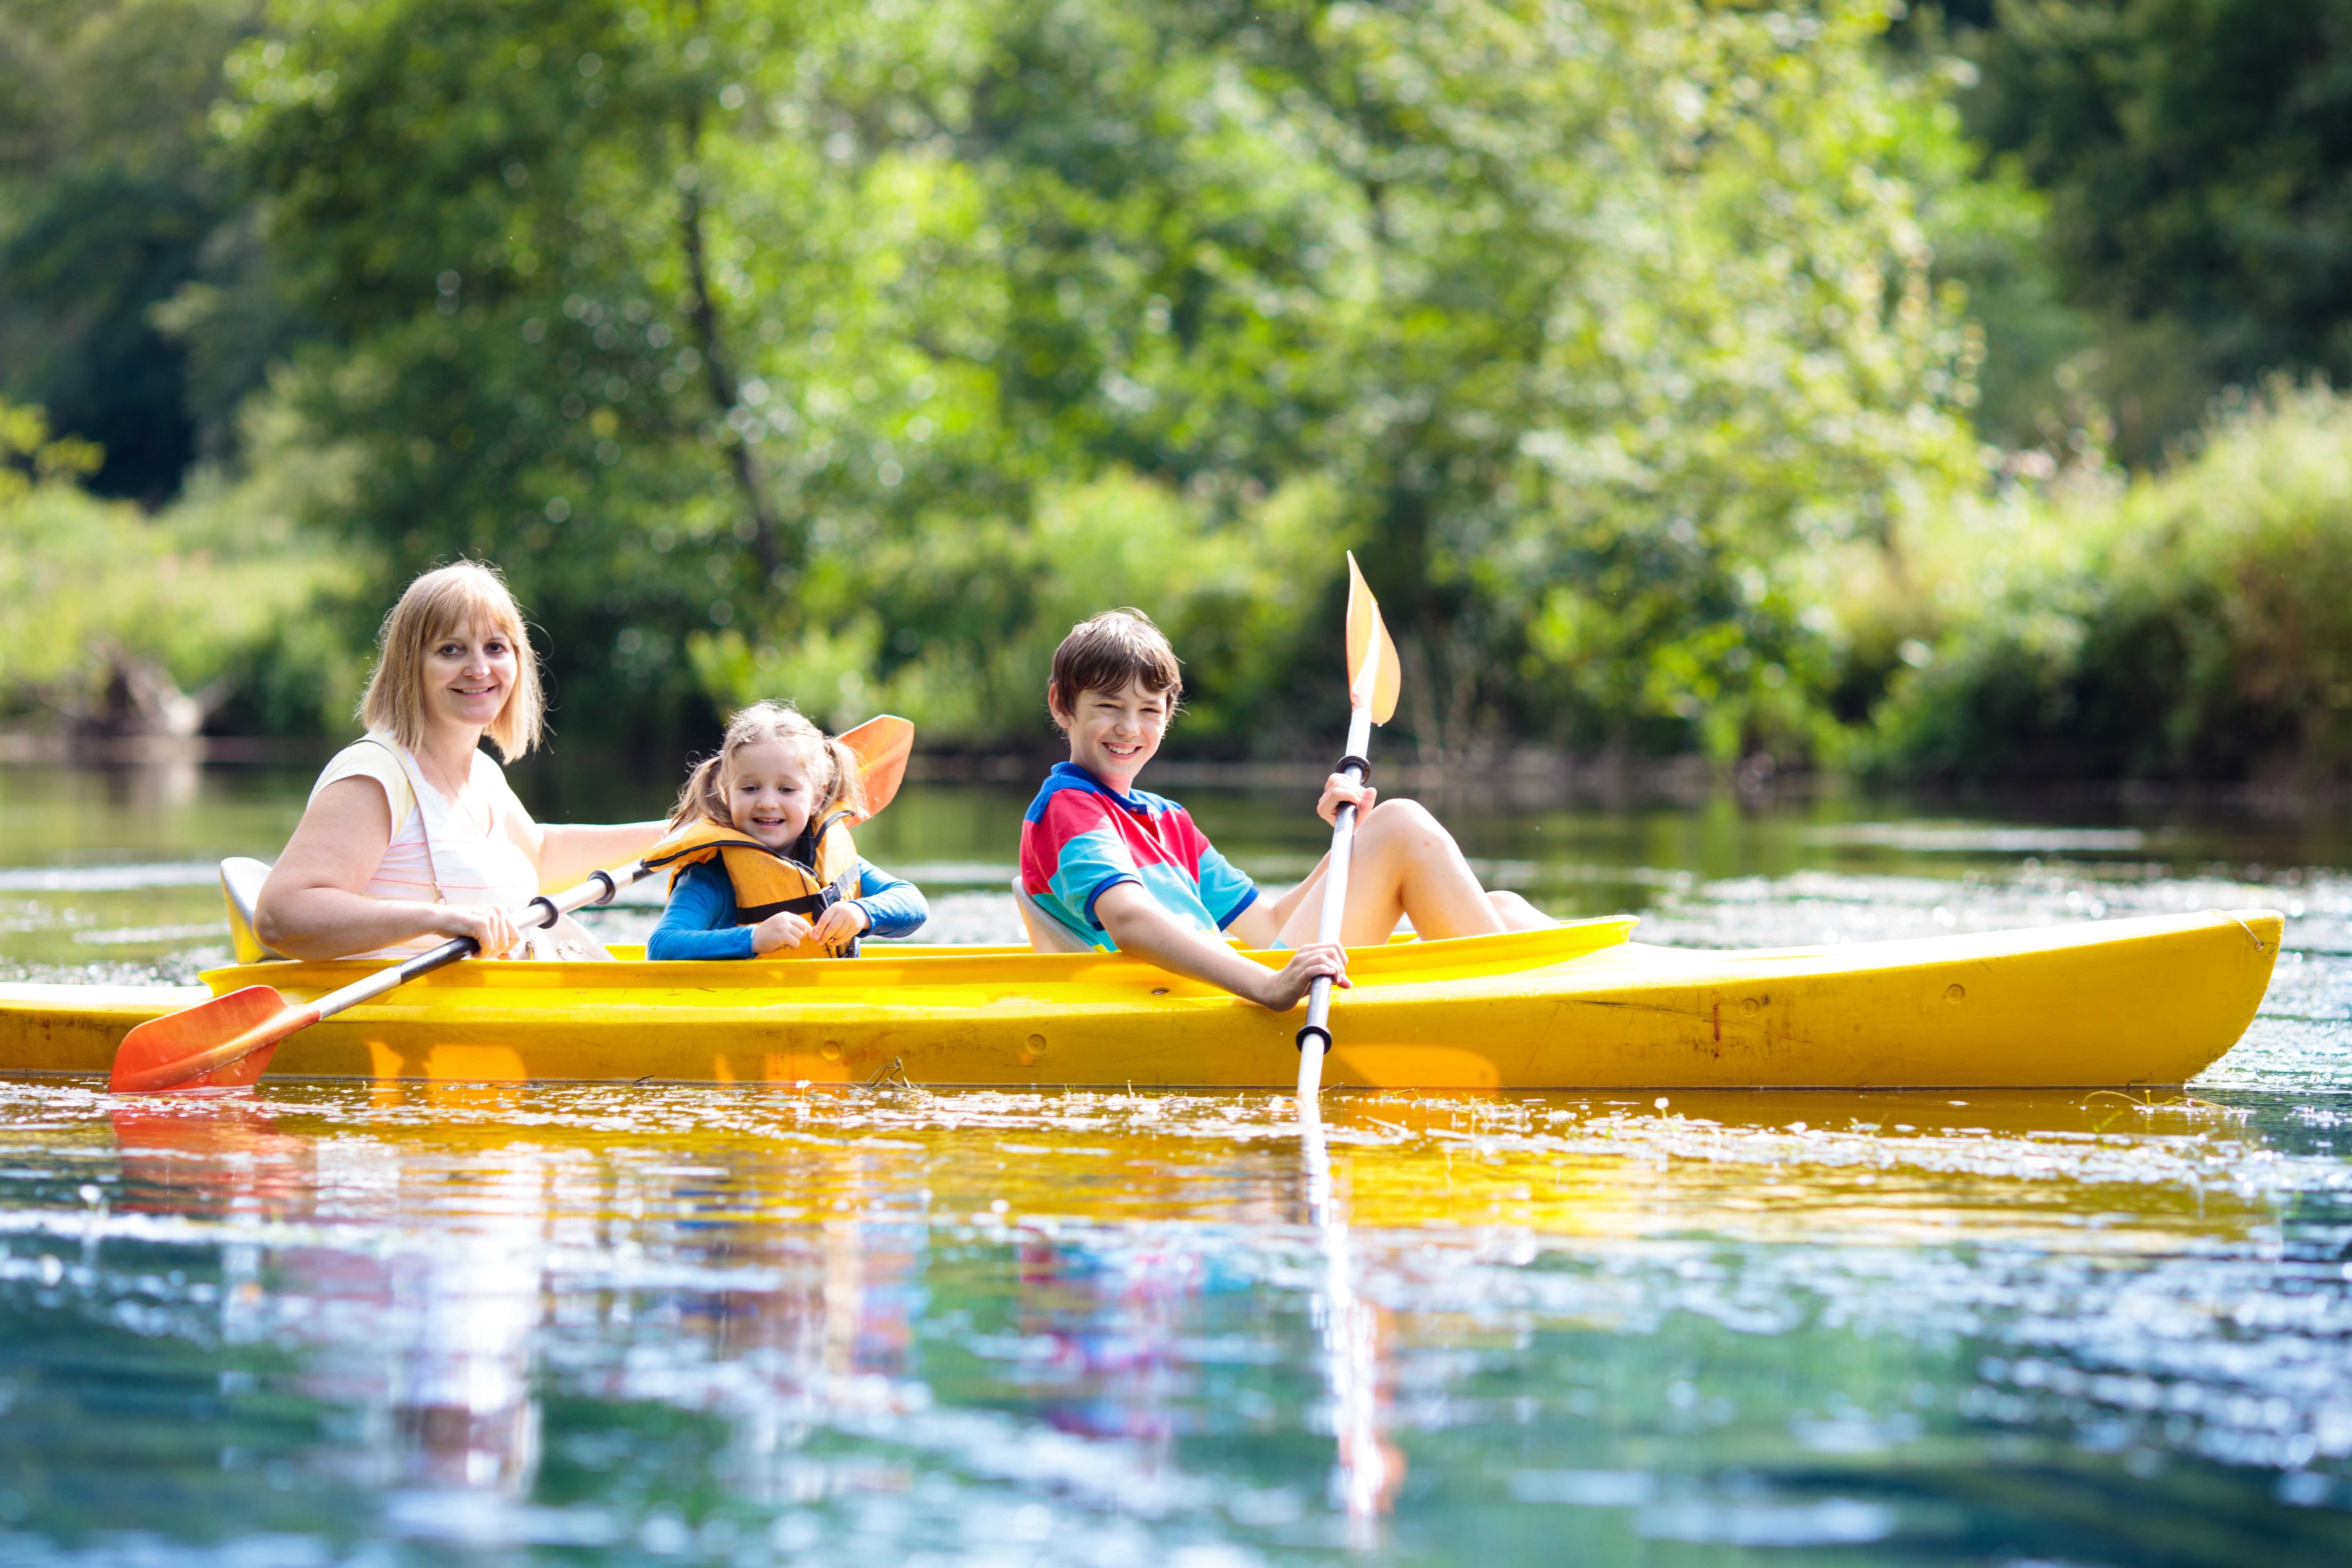 A mother and her kids enjoy summer fun on a family boat ride